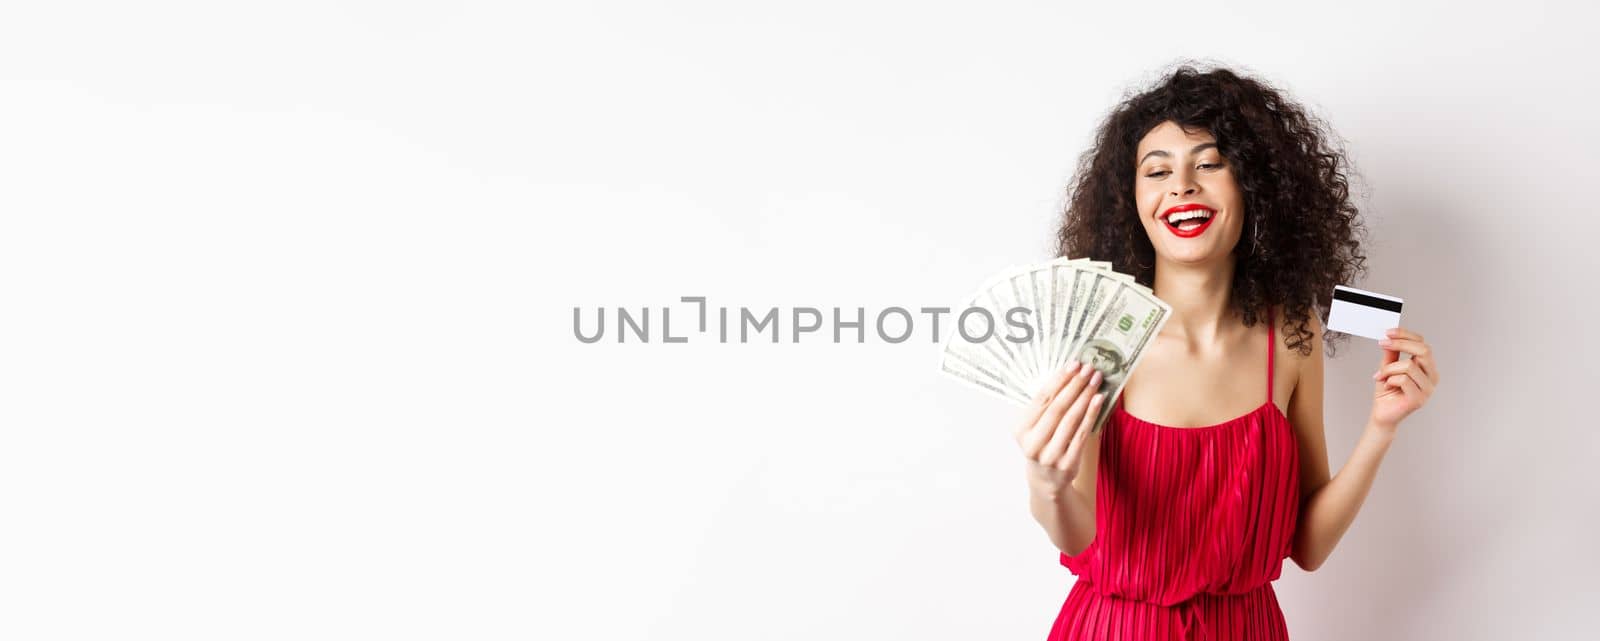 Shopping. Rich successful woman with curly hair and red dress, holding plastic credit card and looking pleased at dollar bills, white background by Benzoix